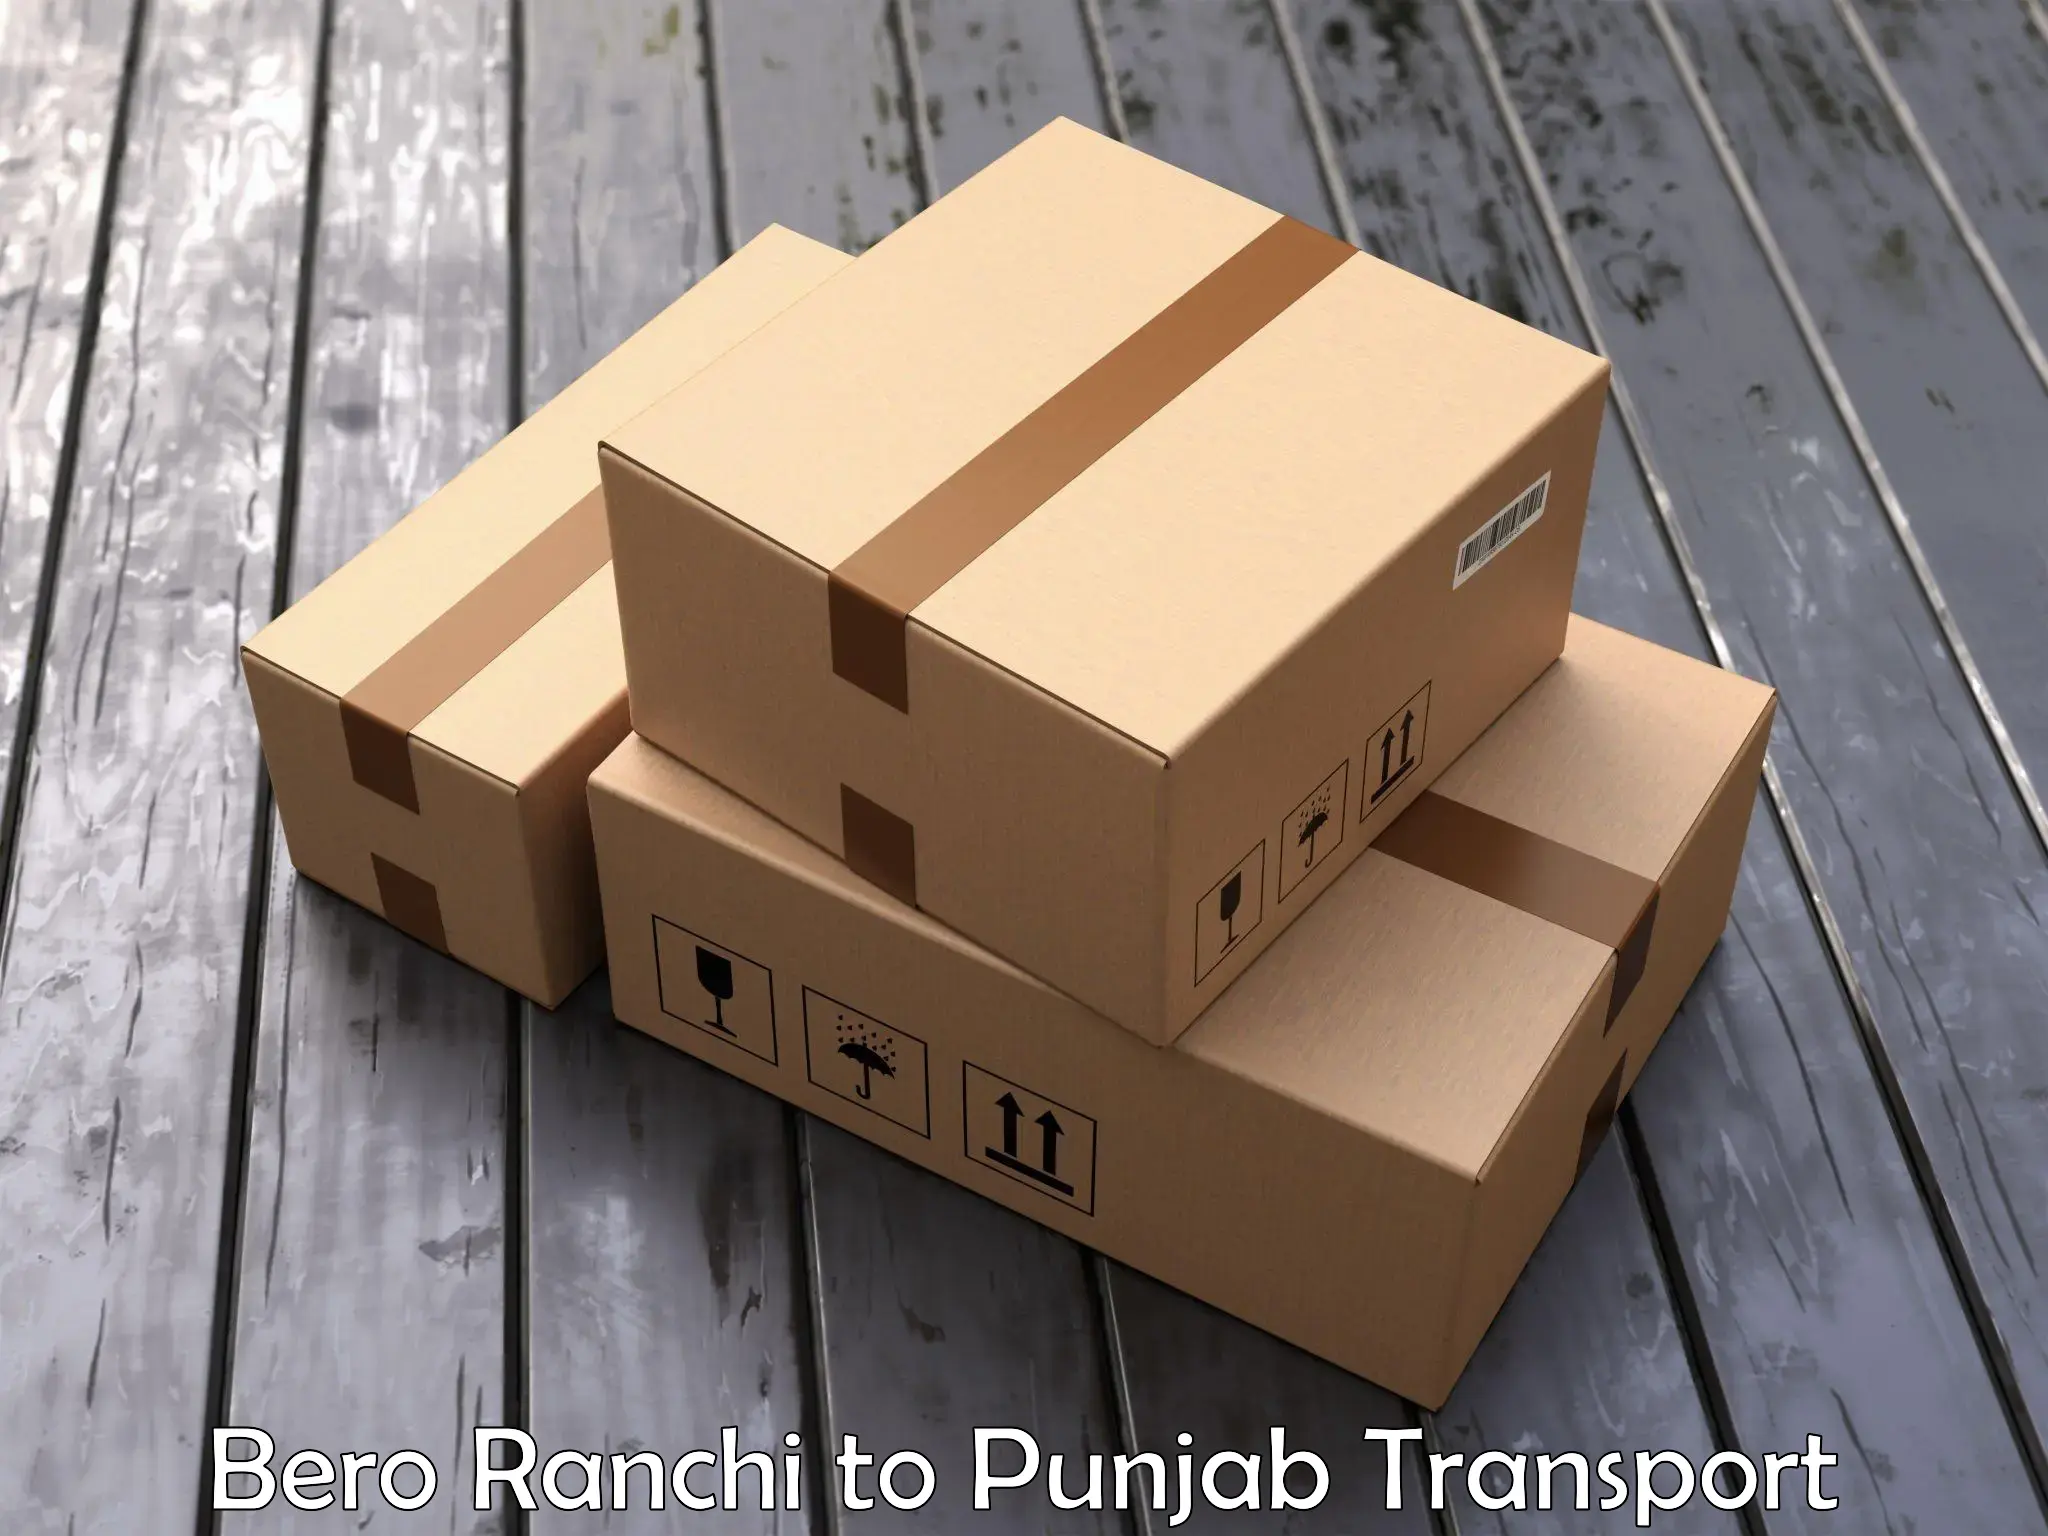 Transport shared services Bero Ranchi to Firozpur